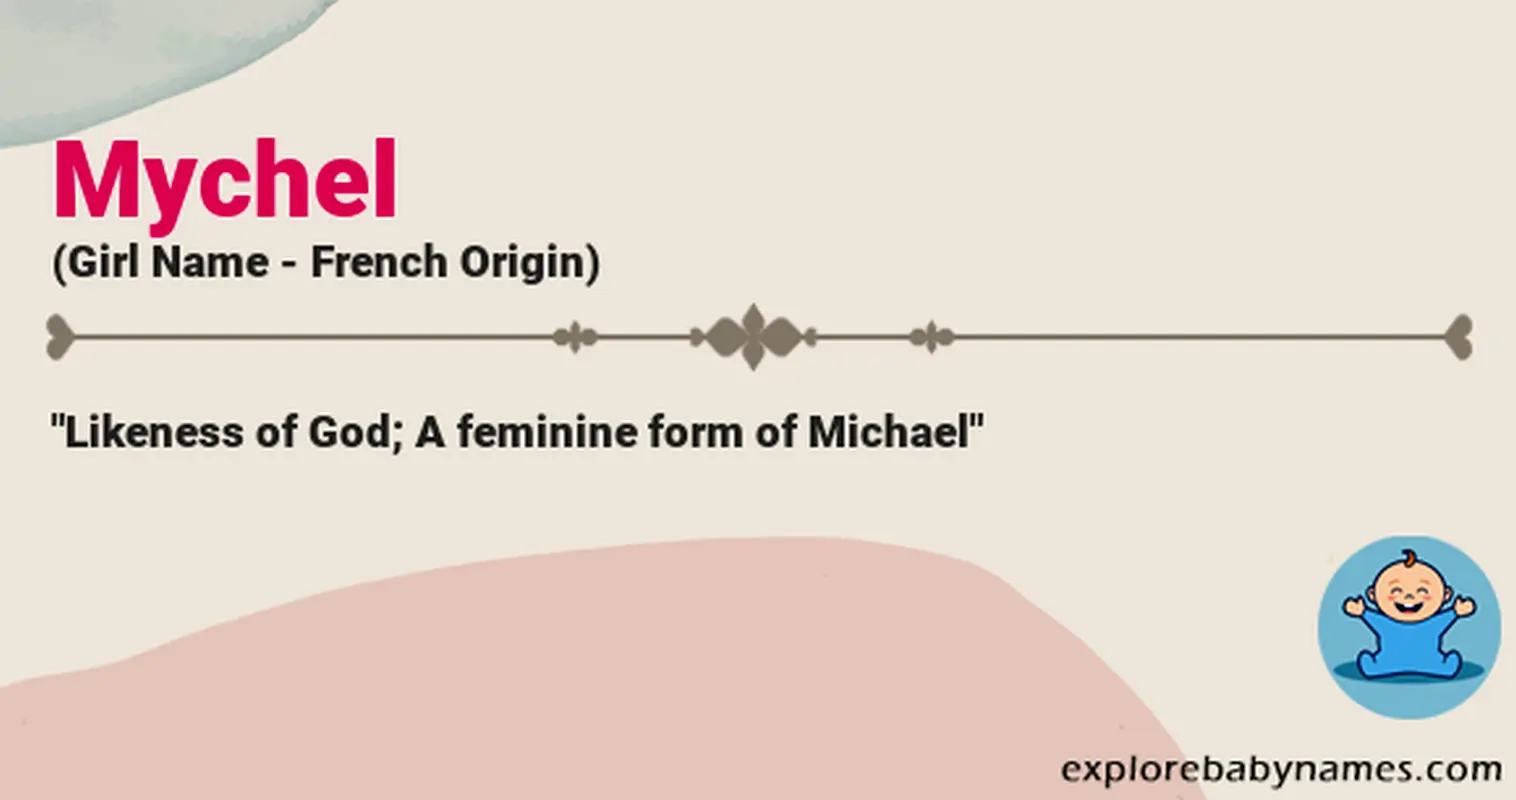 Meaning of Mychel